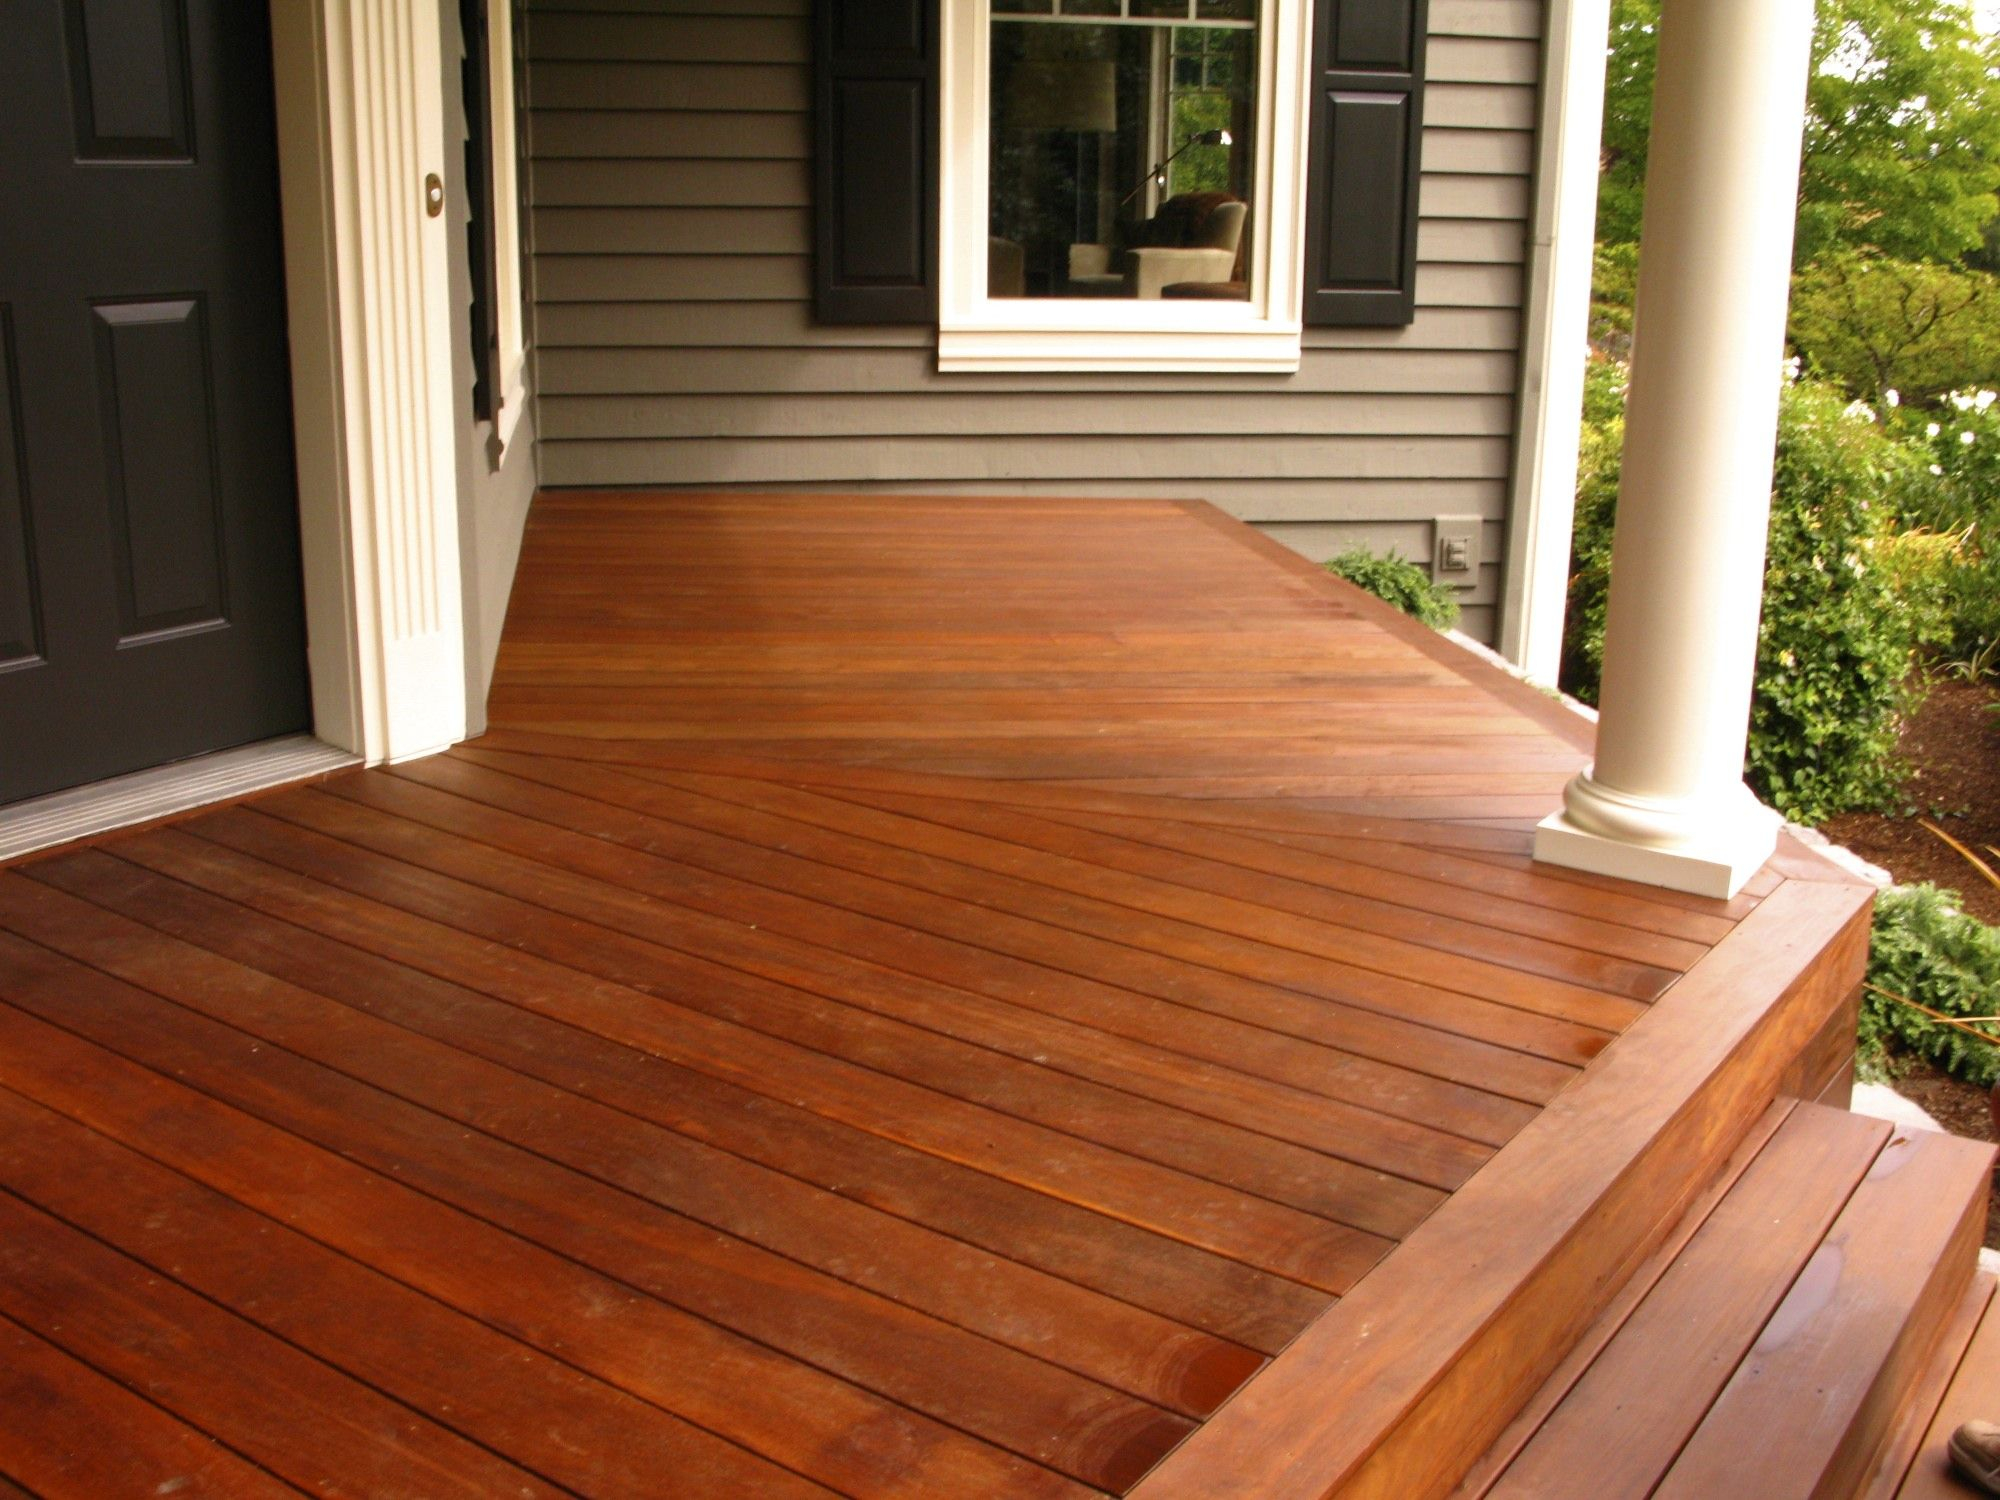 Stained Cedar Deck Color Deck Cedar Deck Cedar Deck Stain pertaining to dimensions 2000 X 1500